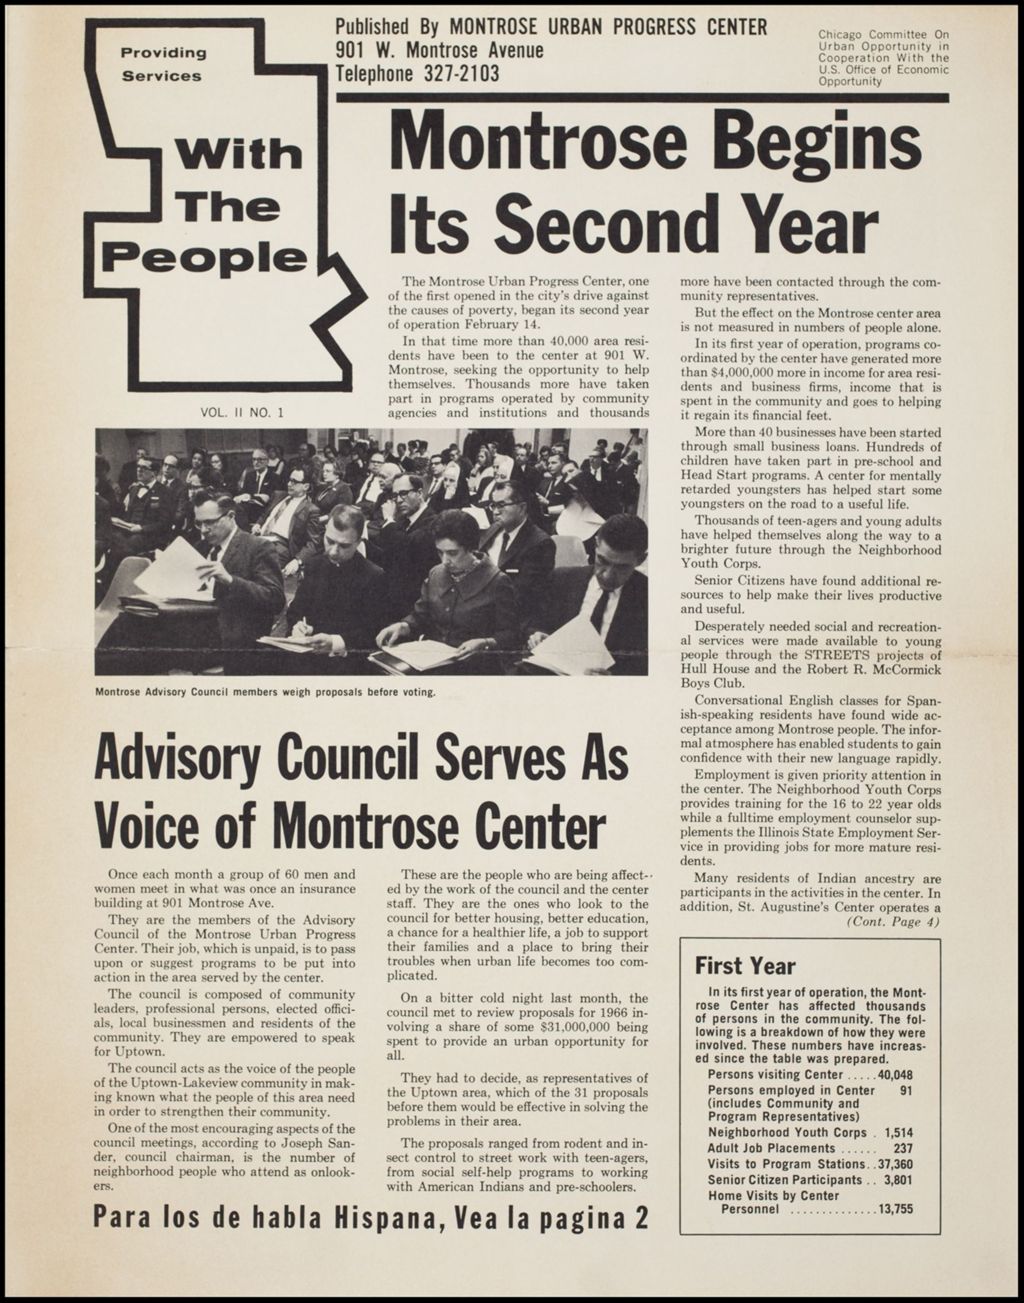 Newsletter "With the People", 1966 (Folder IV-761a)